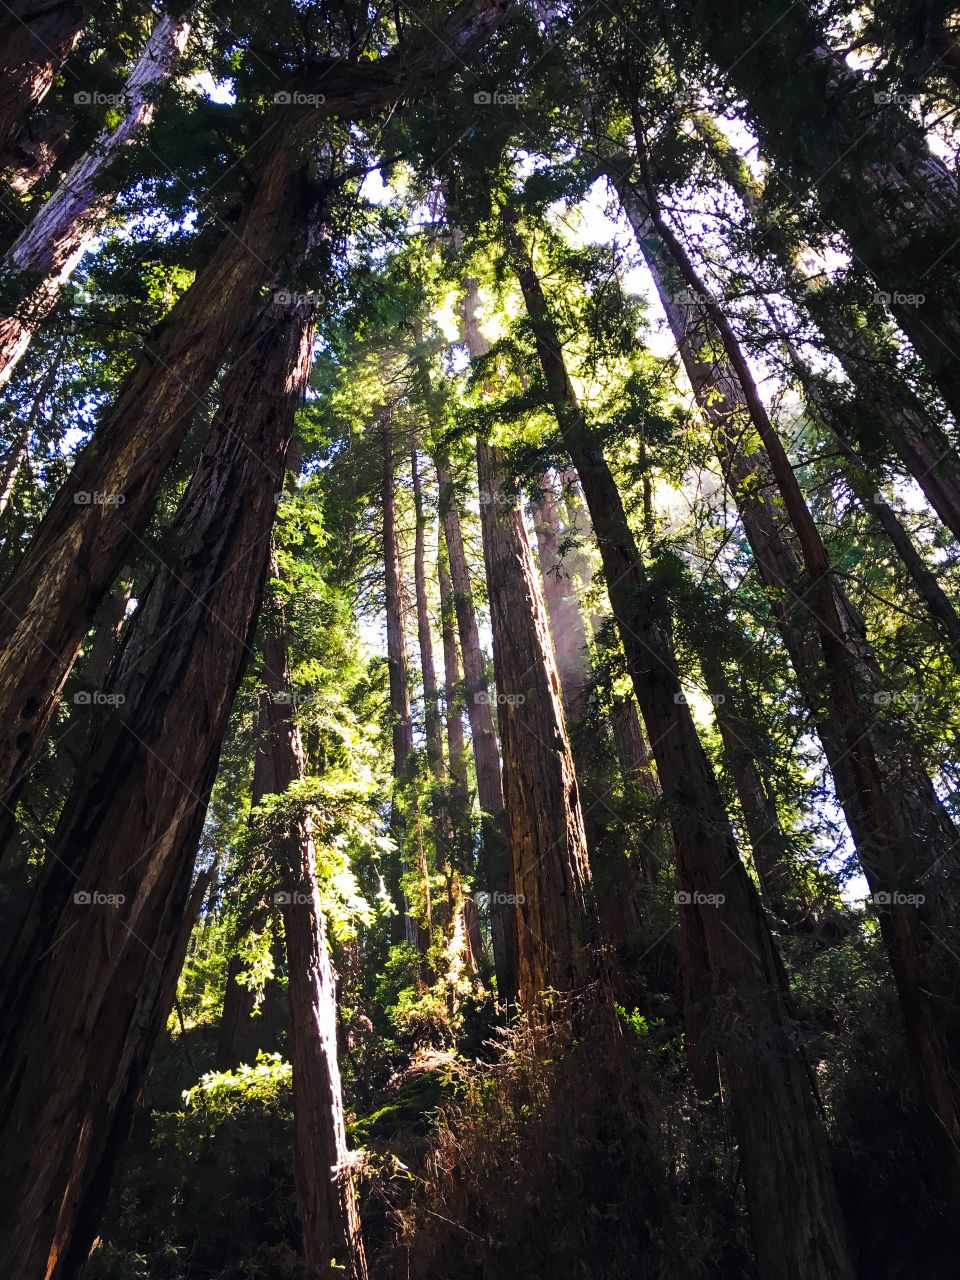 The old growth redwoods of Muir Woods National Monument. 